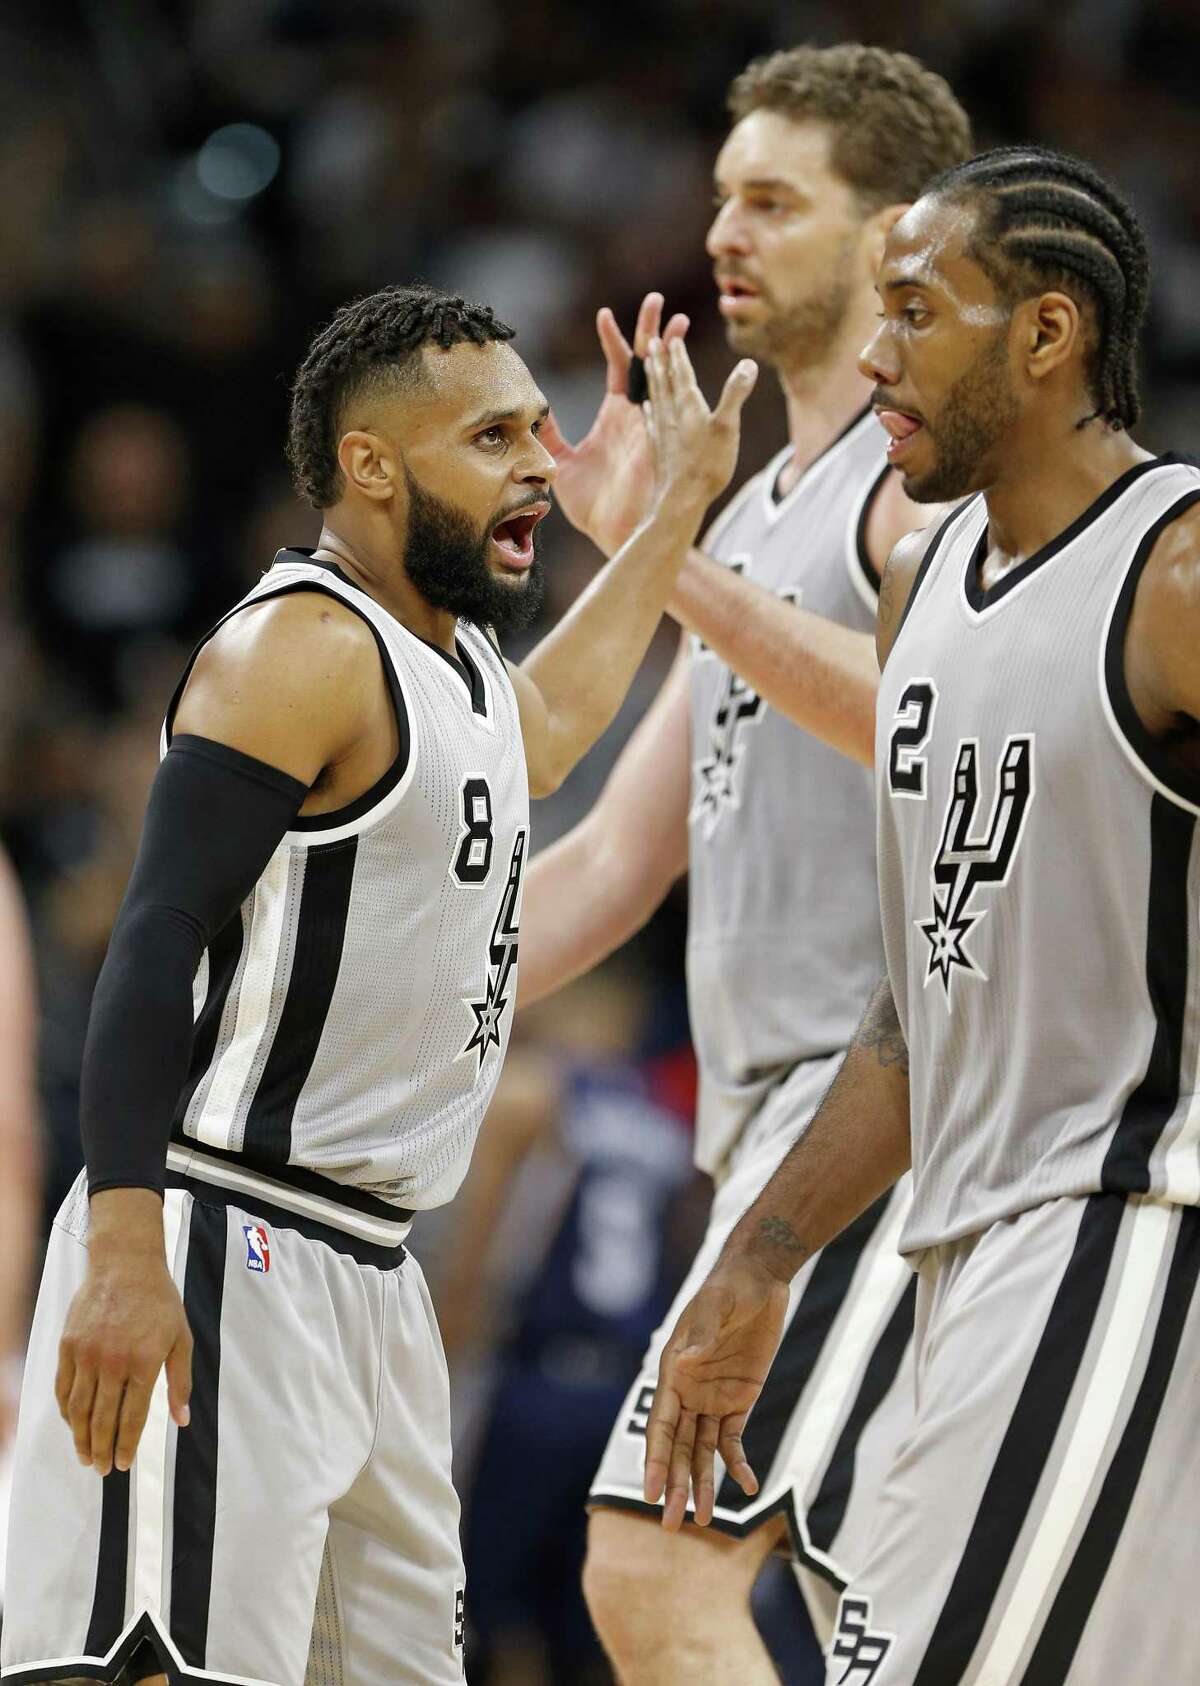 San Antonio Spurs' Patty Mills celebrates with teammates Pau Gasol, and Kawhi Leonard after making a 3-pointer during second half action of Game 1 in the first round of the Western Conference playoffs against the Memphis Grizzlies Saturday April 15, 2017 at the AT&T Center. The Spurs won 111-82.